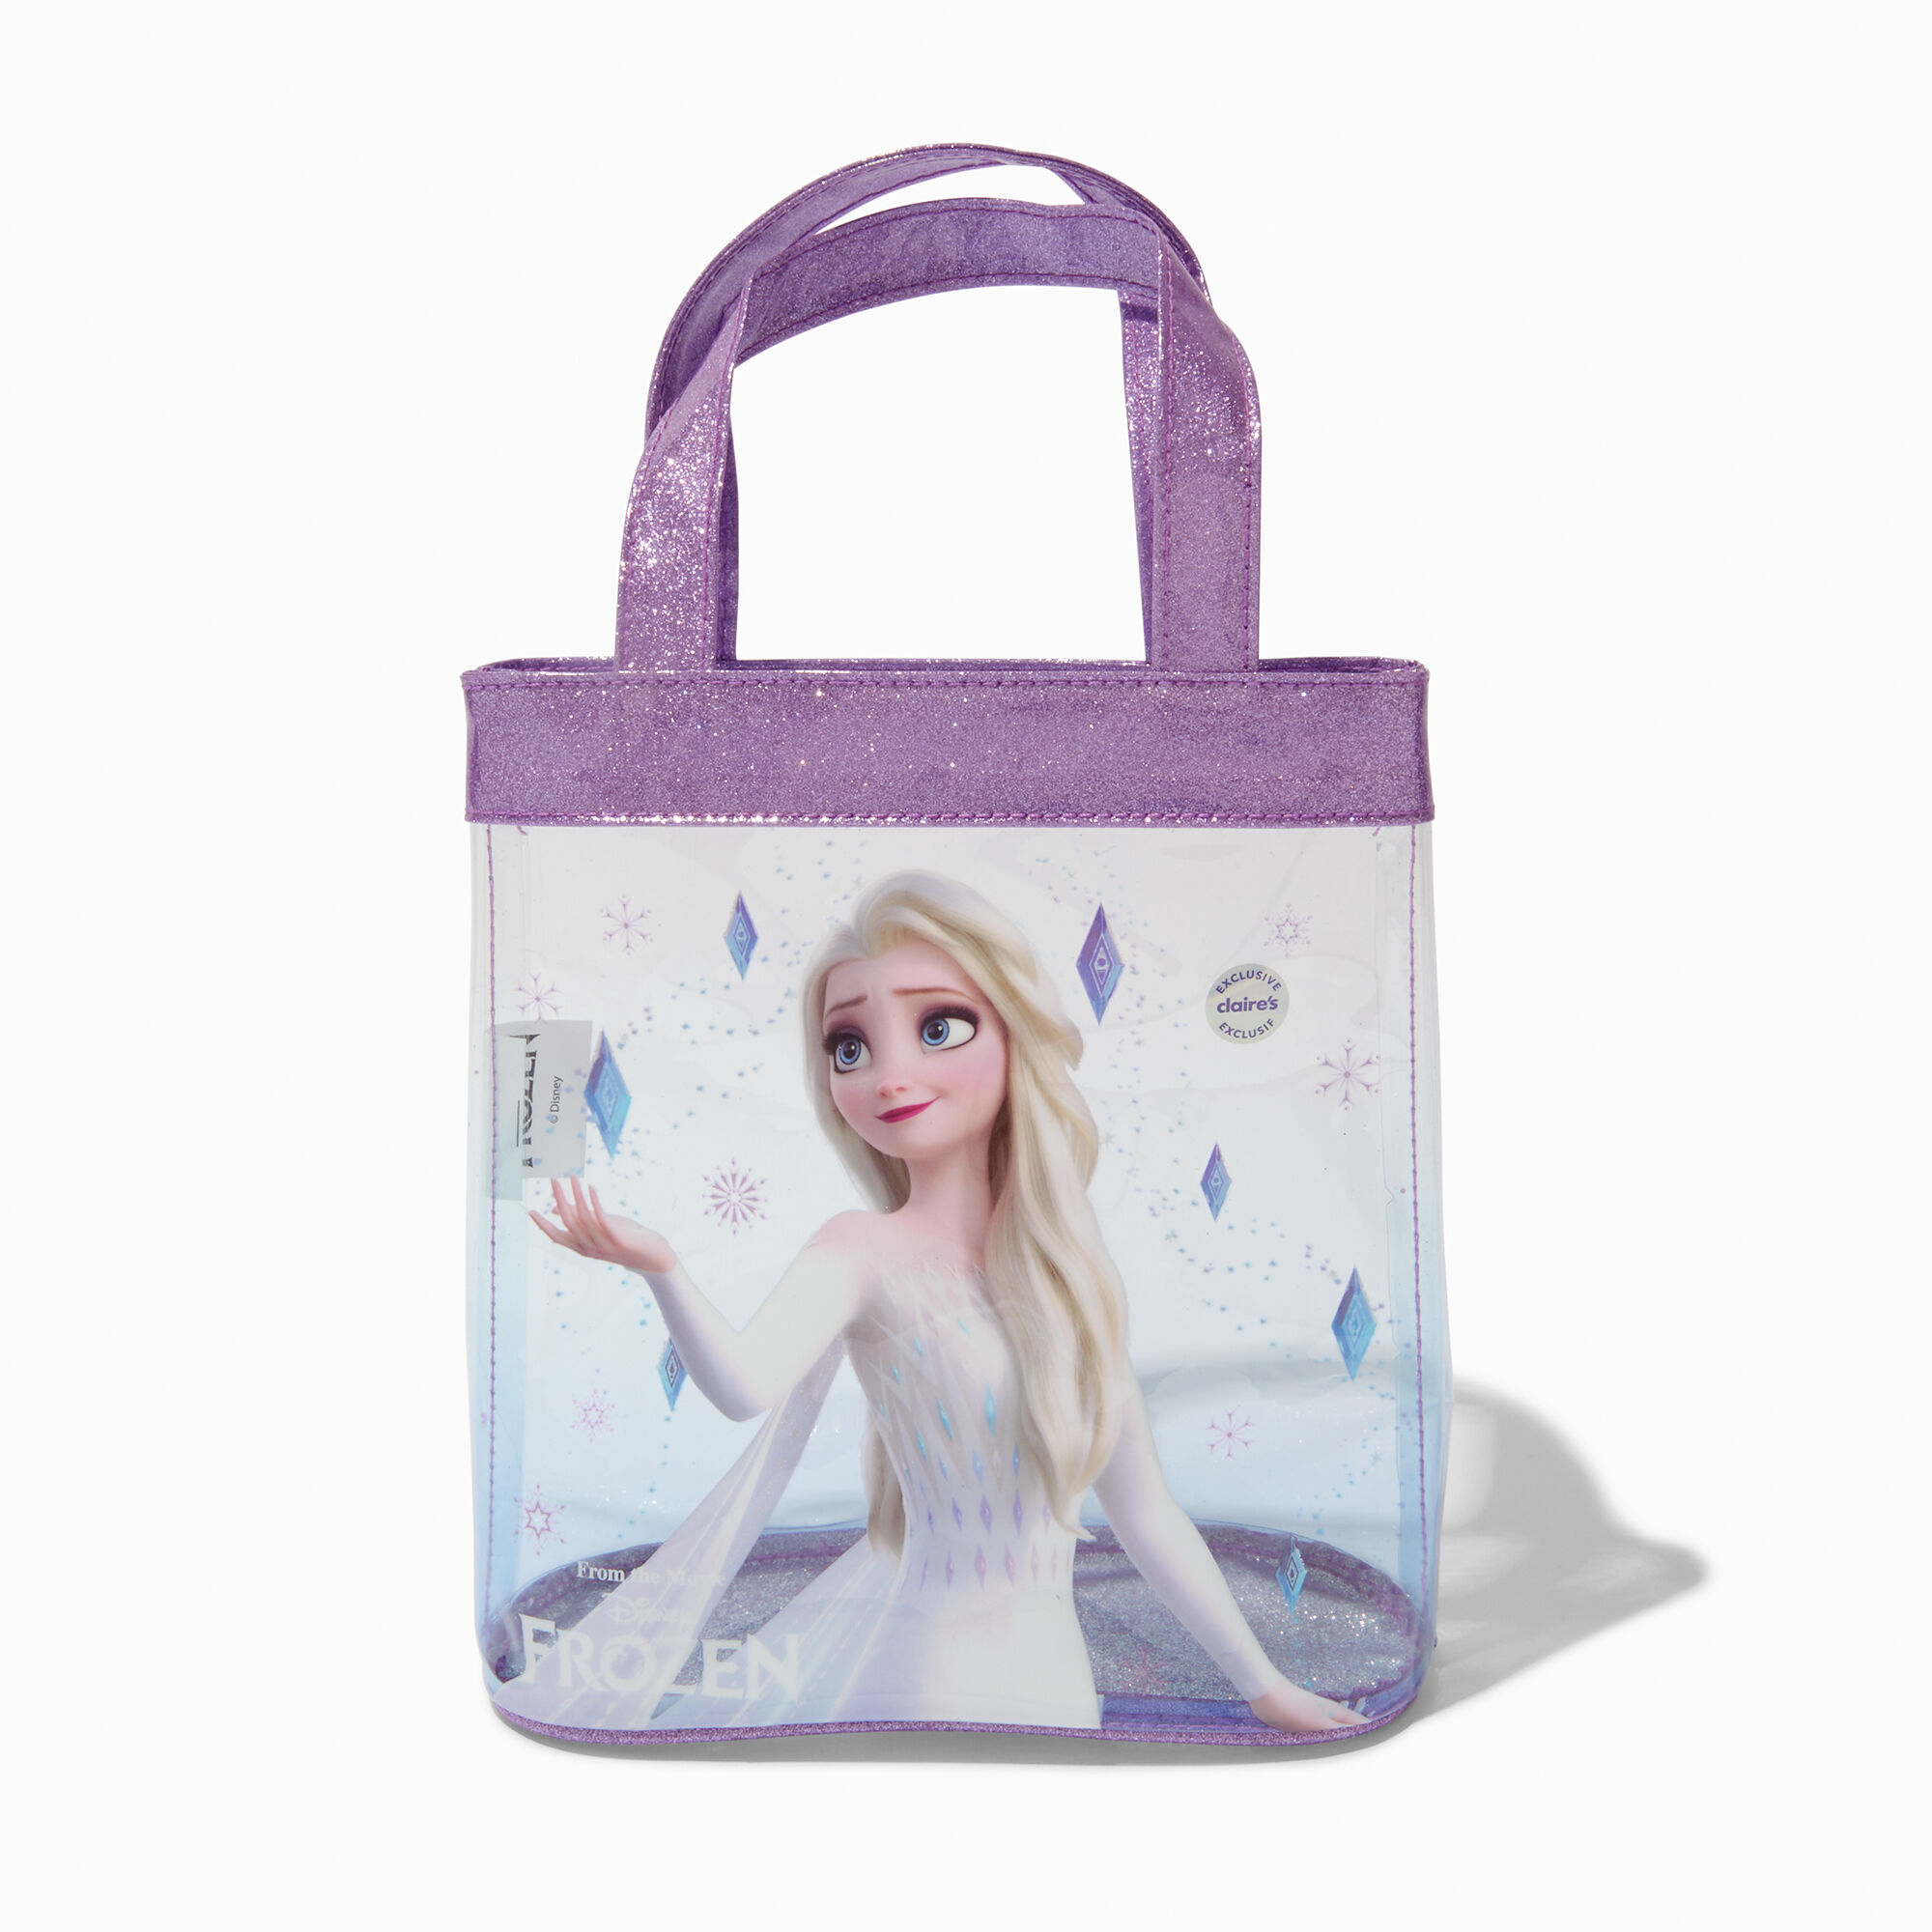 View Disney Frozen 2 Claires Exclusive Jelly Tote Bag information